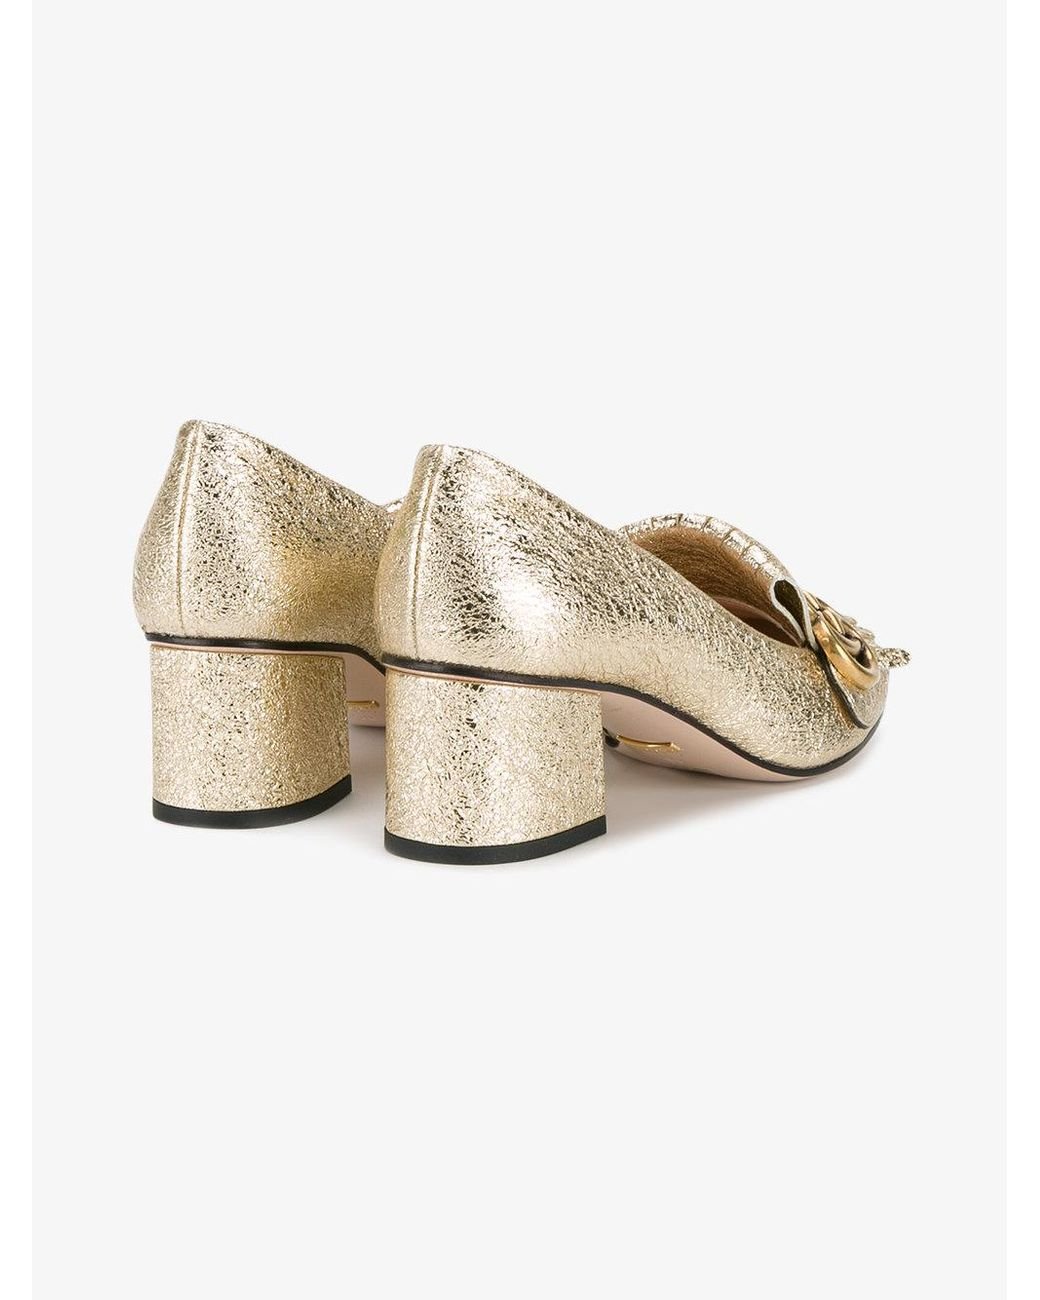 Gucci Gold Marmont 55mm Pumps in Metallic | Lyst